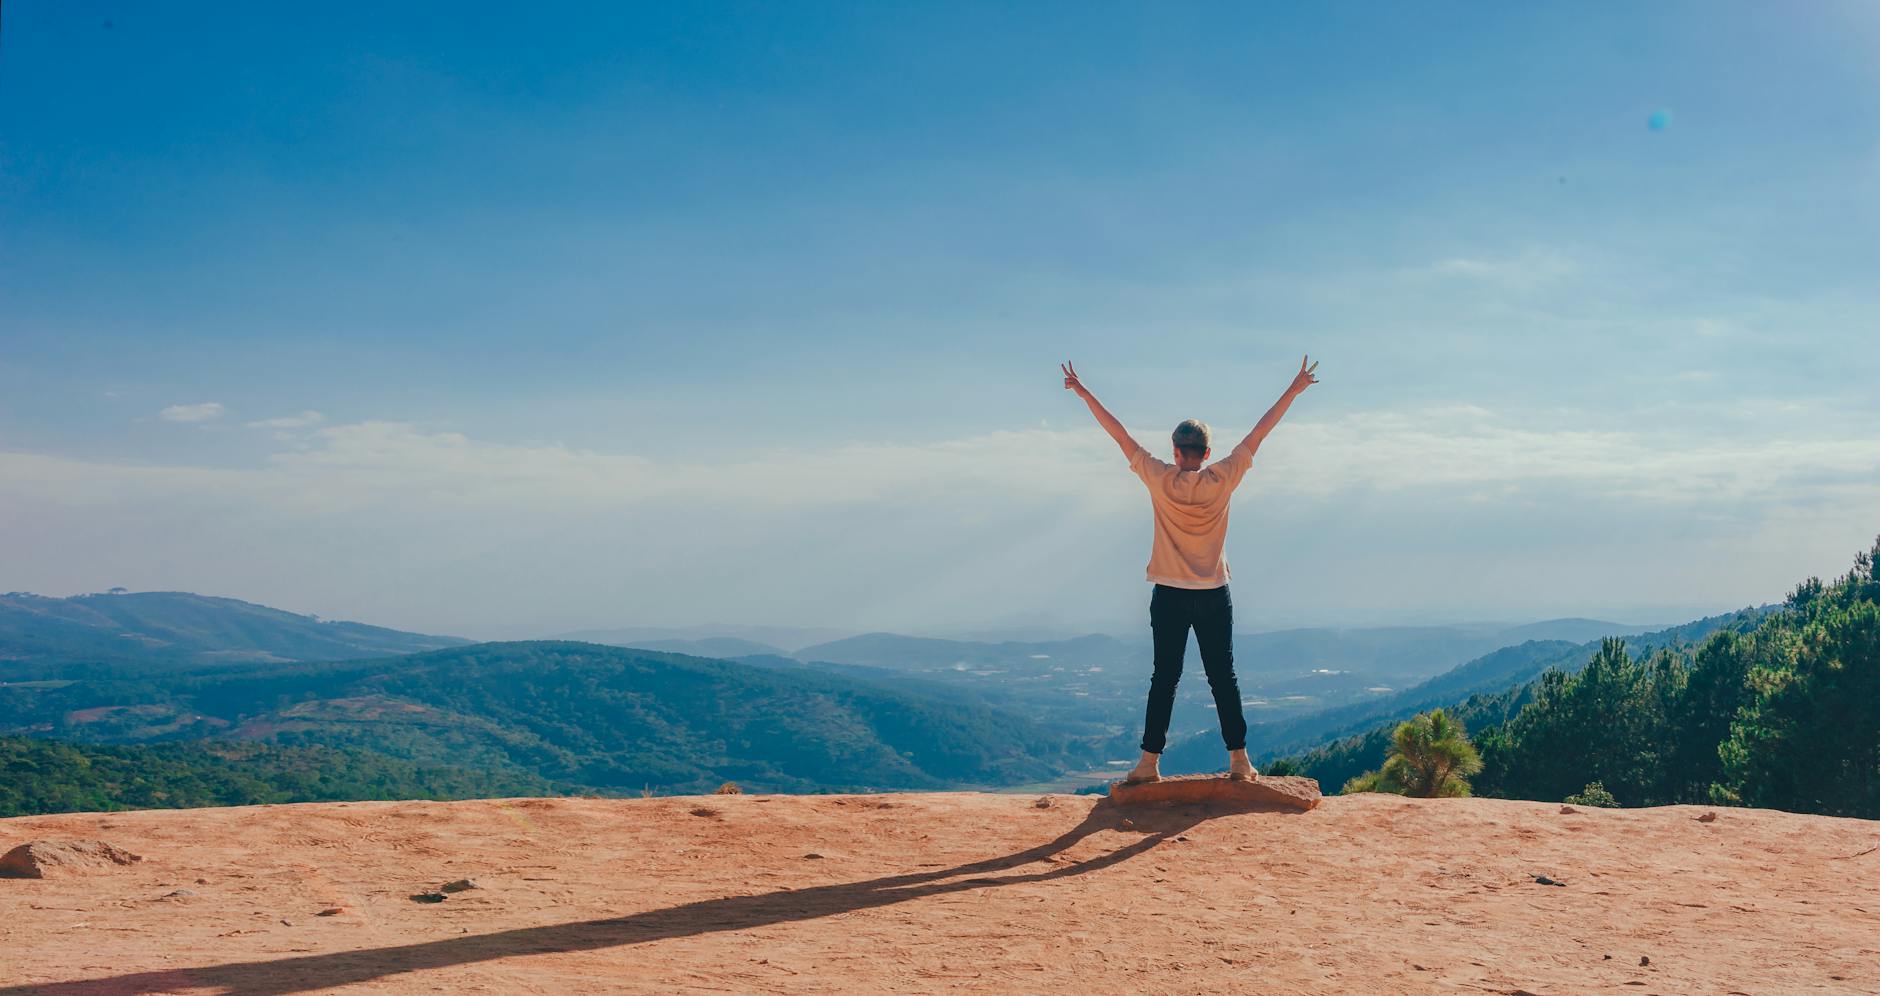 Image of an individual standing at the edge of a cliff facing a verdant canyon, back to the camera with arms outstretched and each hand holding up fingers in a V for victory sign.

Photo by Min An on Pexels.com